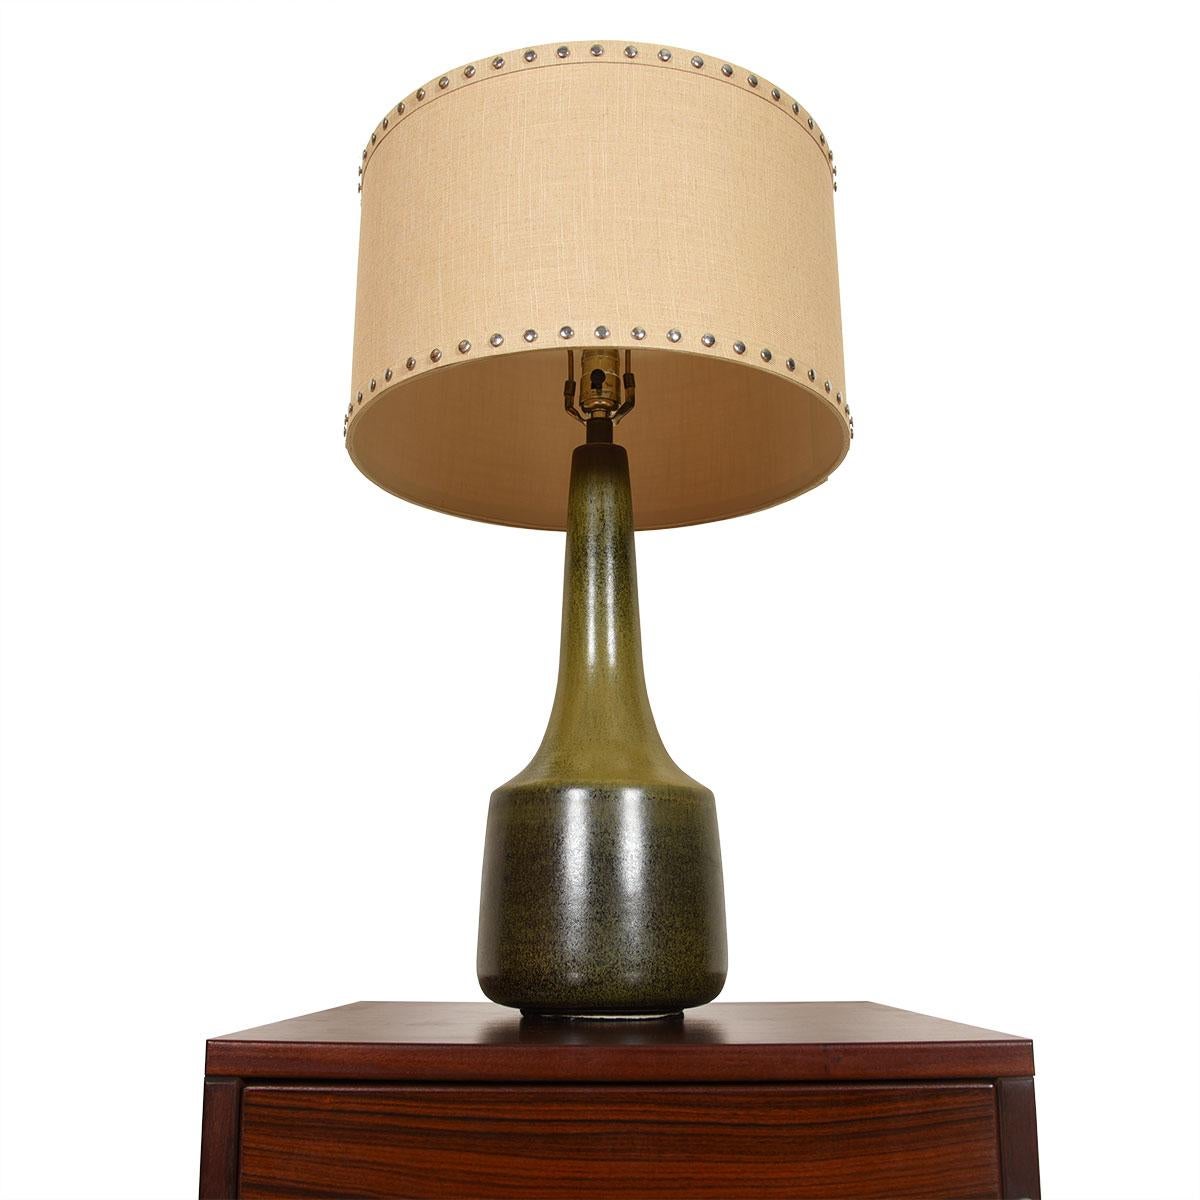 Ceramic Midcentury Table Lamp by Bostlund For Sale 1